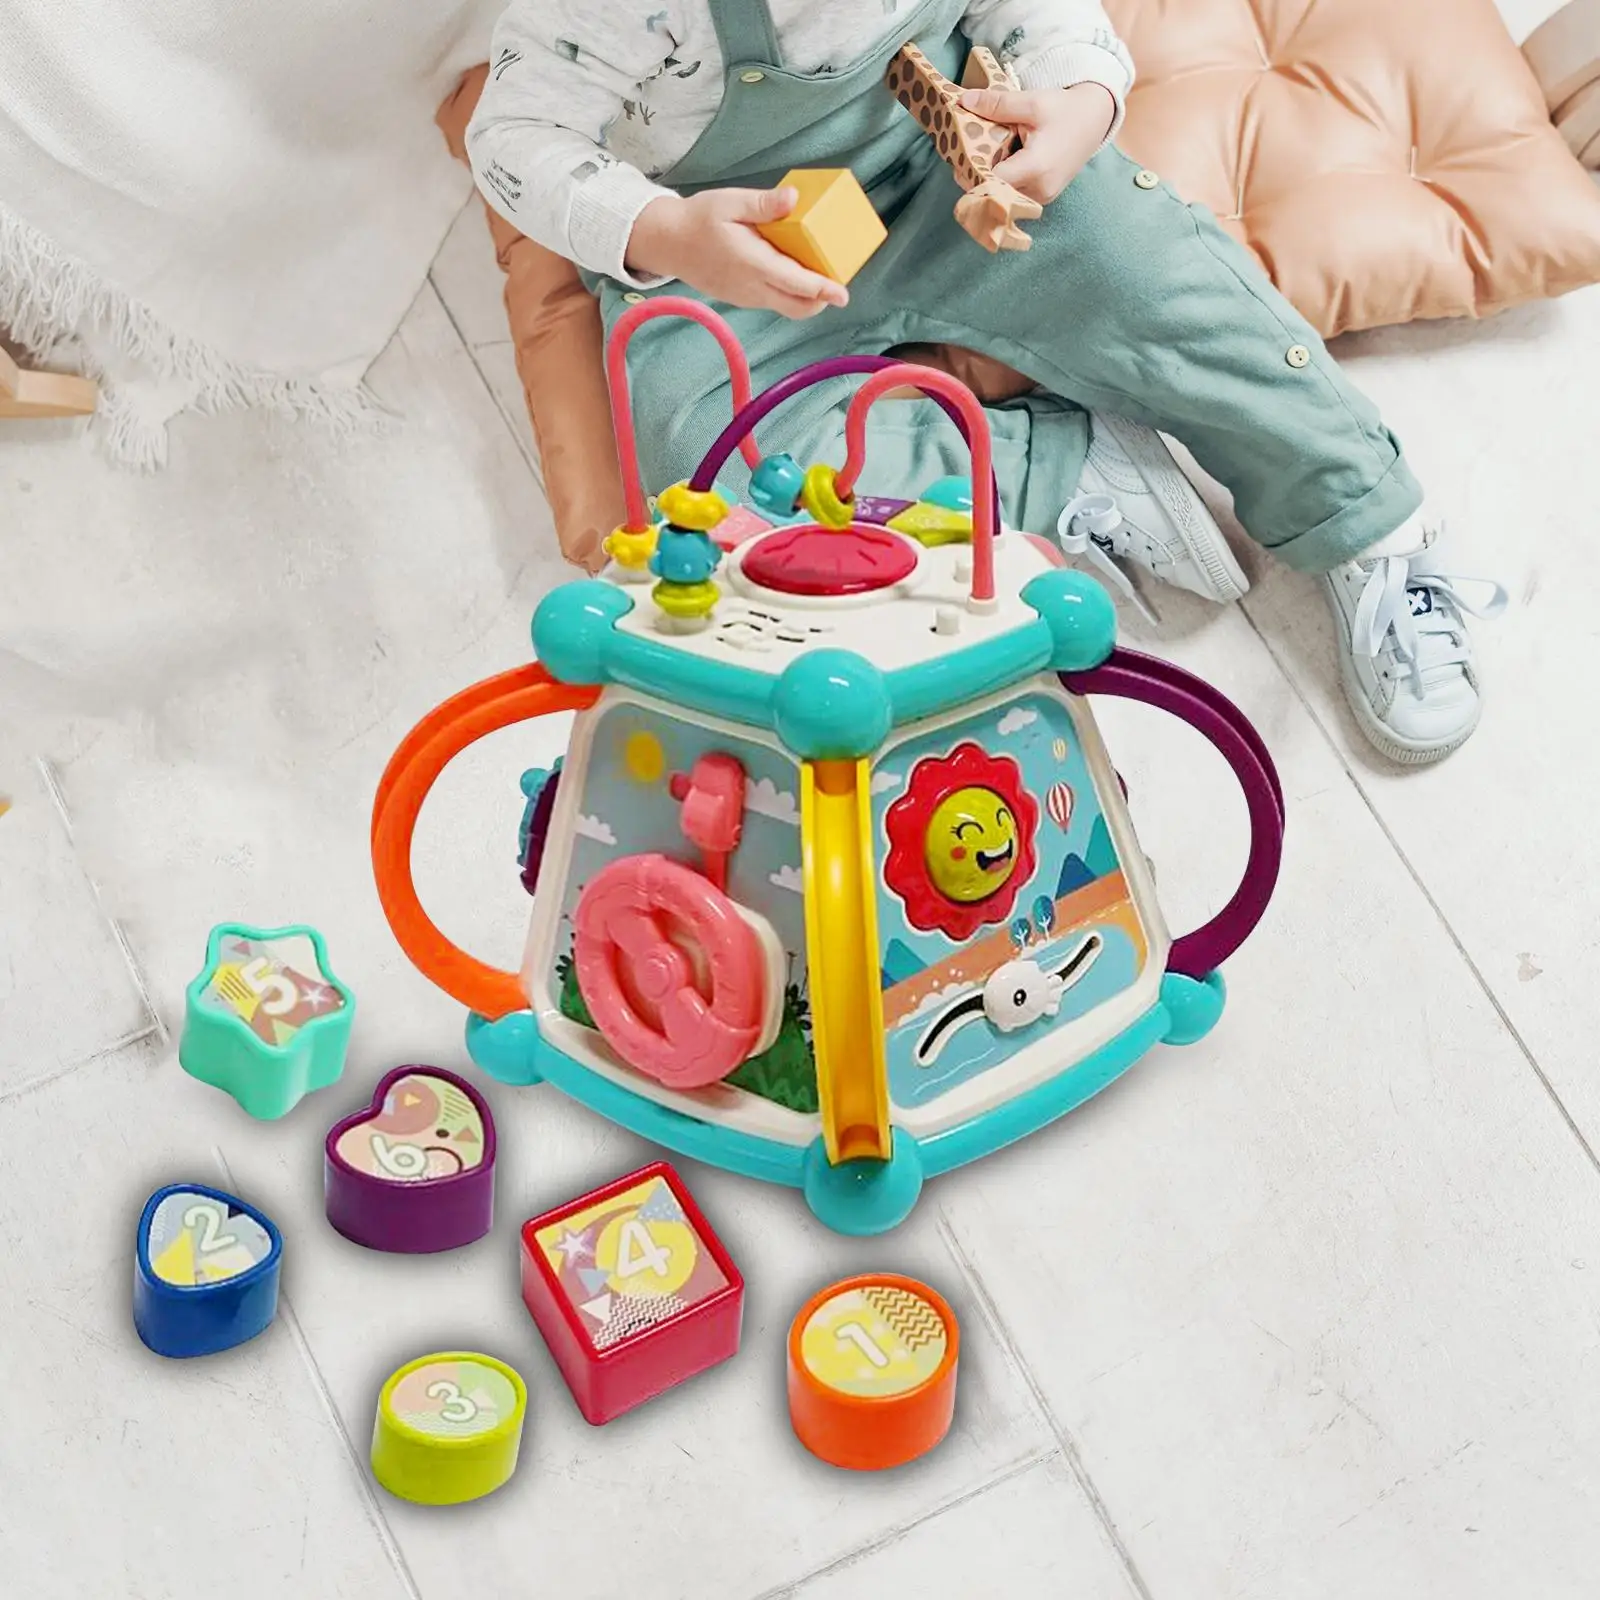 Baby Toy Development Montessori Educational Toys Activity Cube Toy 6 Sided Activity Center for 1 Year Olds Toddlers Gift